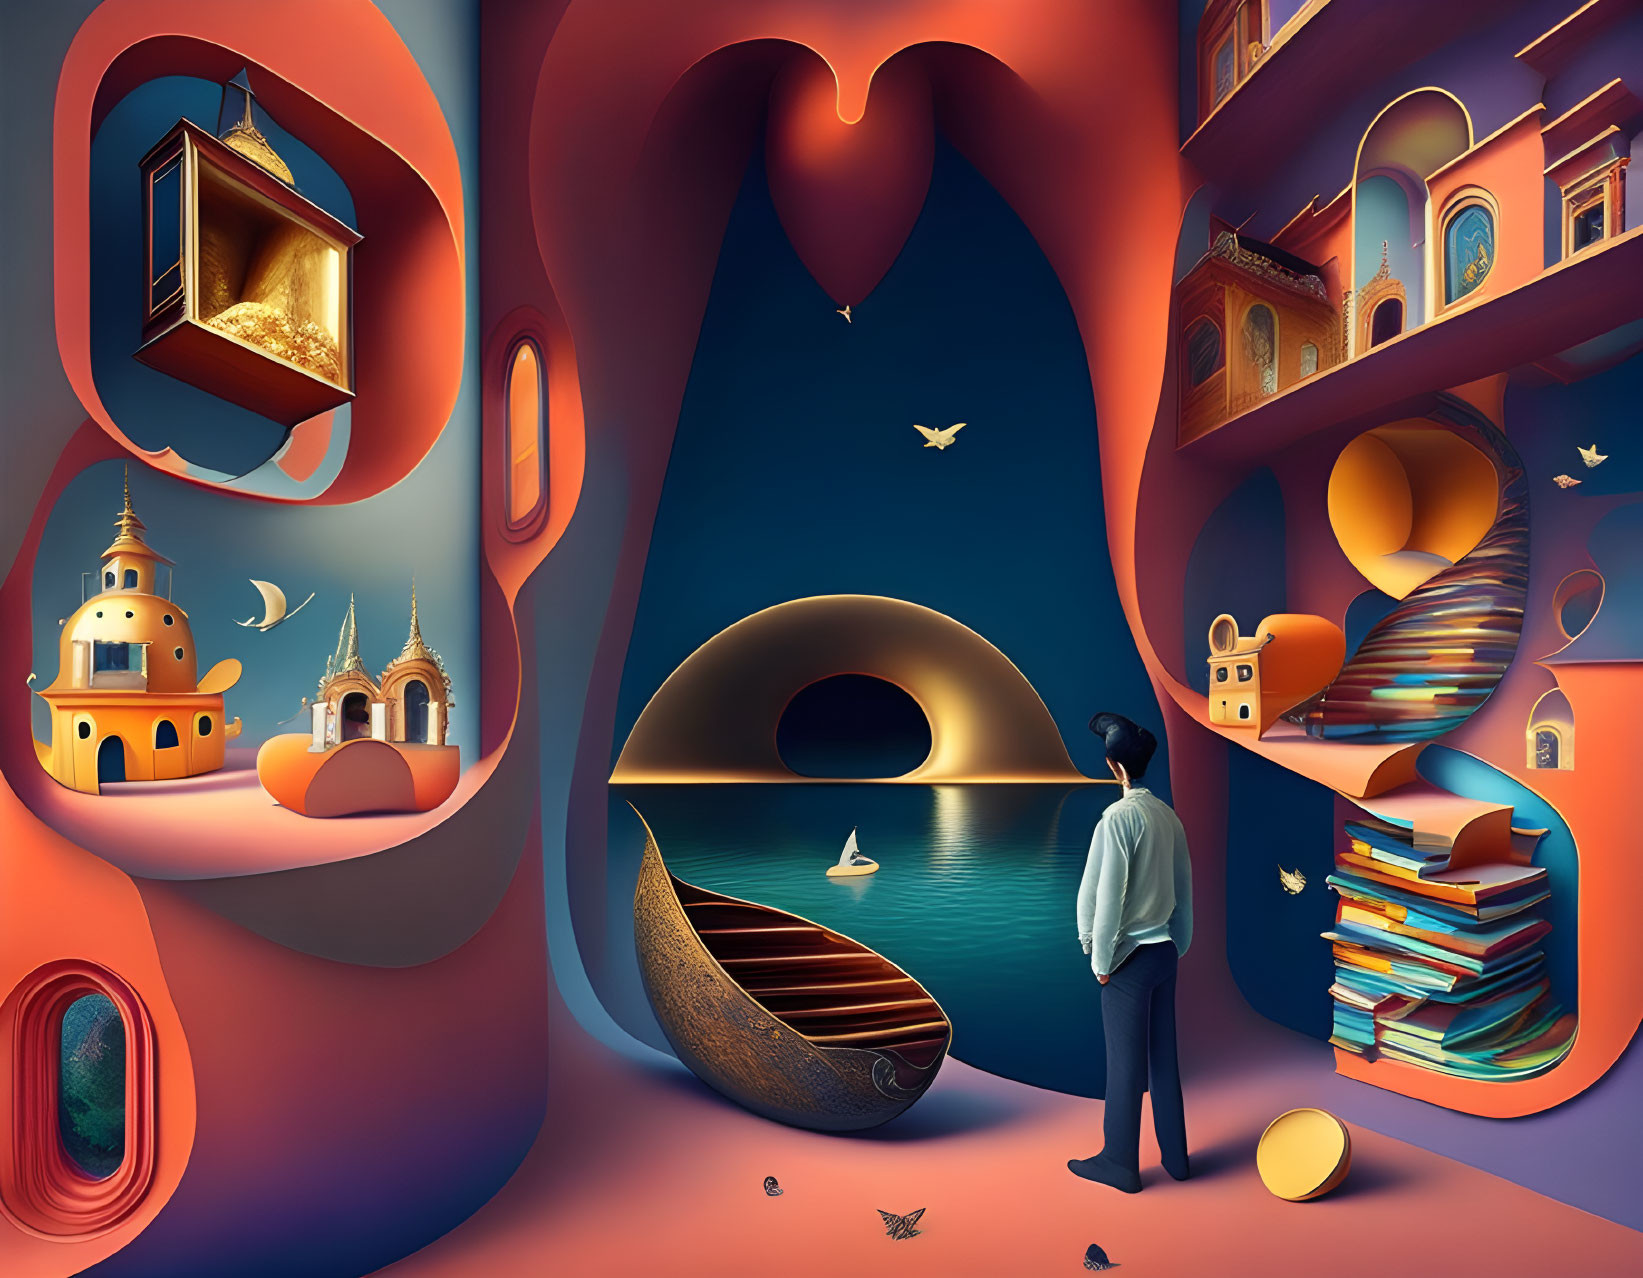 Surreal landscape with man, boat, moonlit sea, floating books, and swirling passages